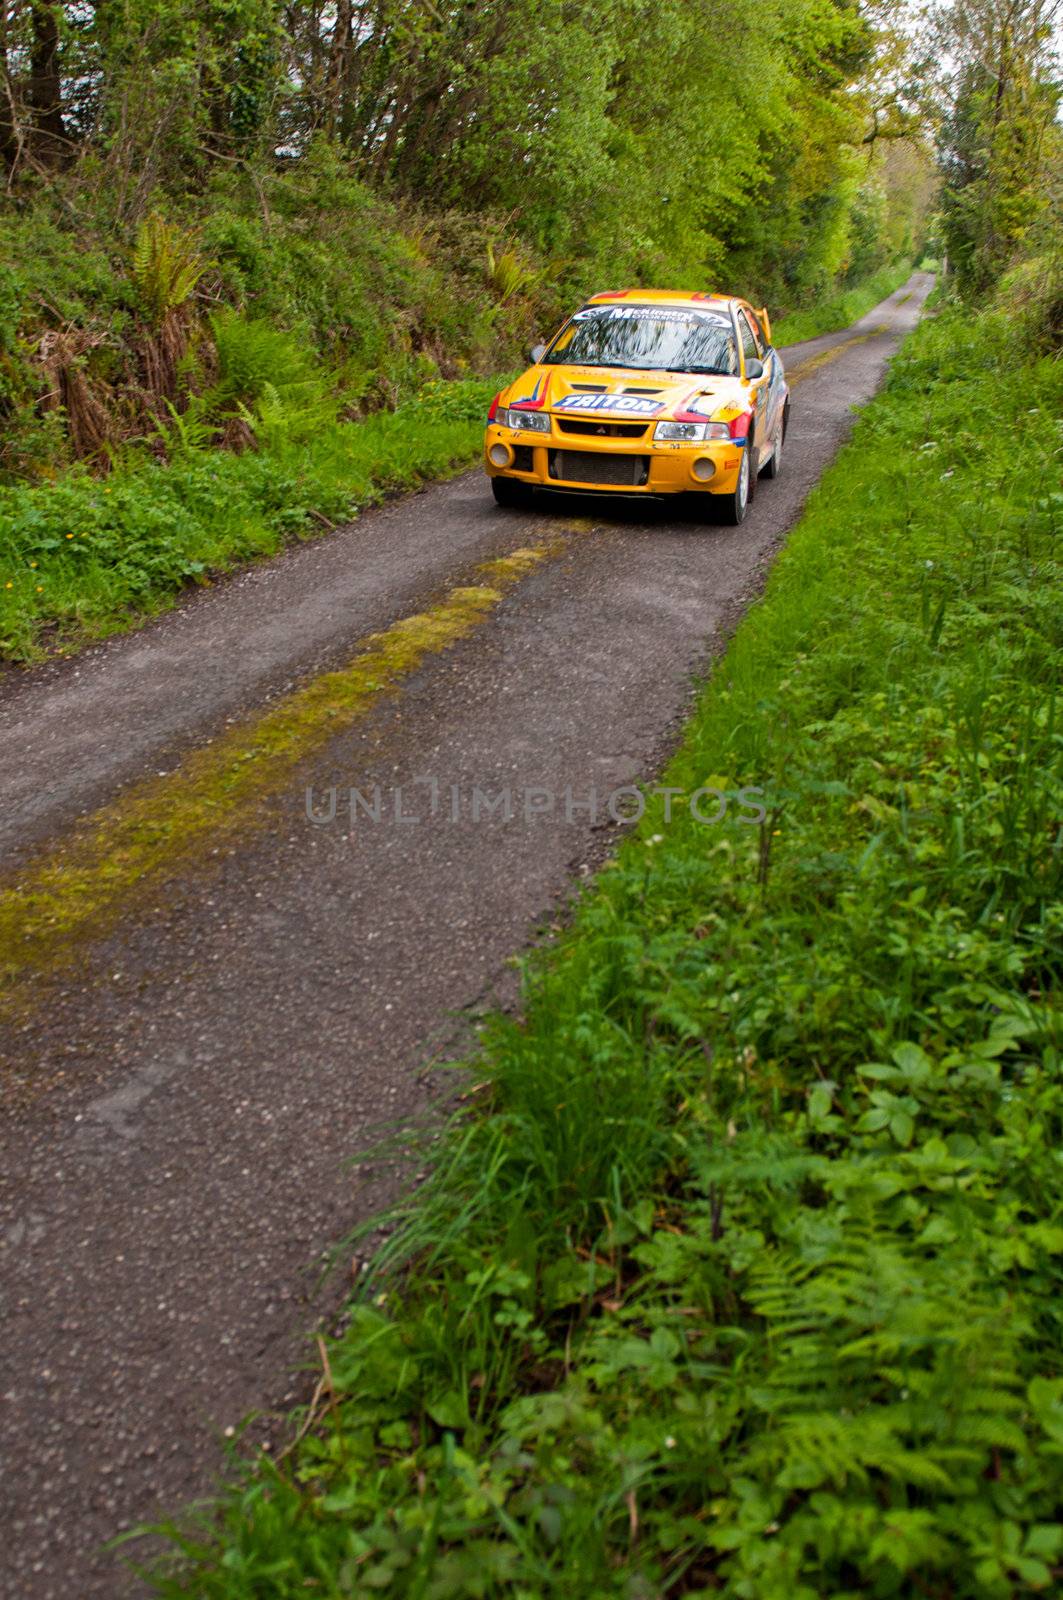 MALLOW, IRELAND - MAY 19: P. Barrett driving Mitsubishi Evo at the Jim Walsh Cork Forest Rally on May 19, 2012 in Mallow, Ireland. 4th round of the Valvoline National Forest Rally Championship.